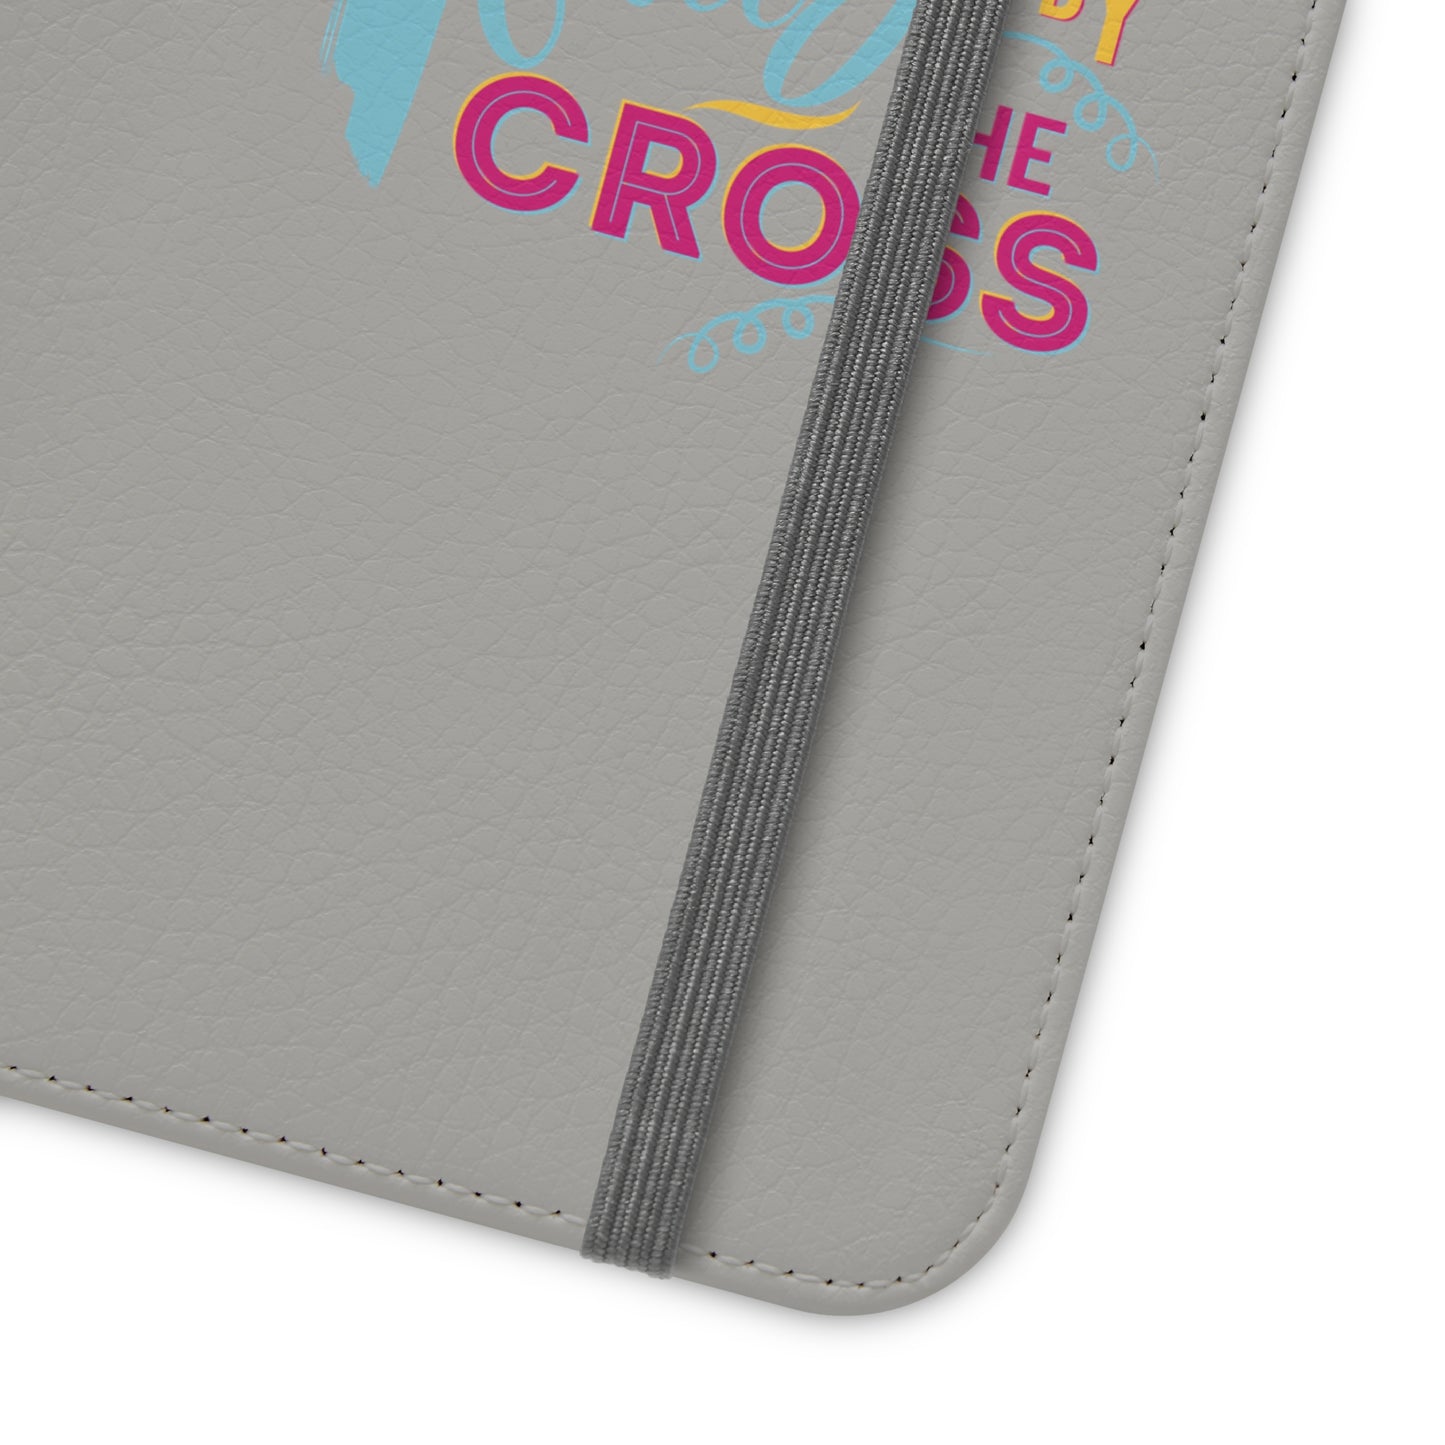 Condemned By Sin Freed By The Cross Phone Flip Cases